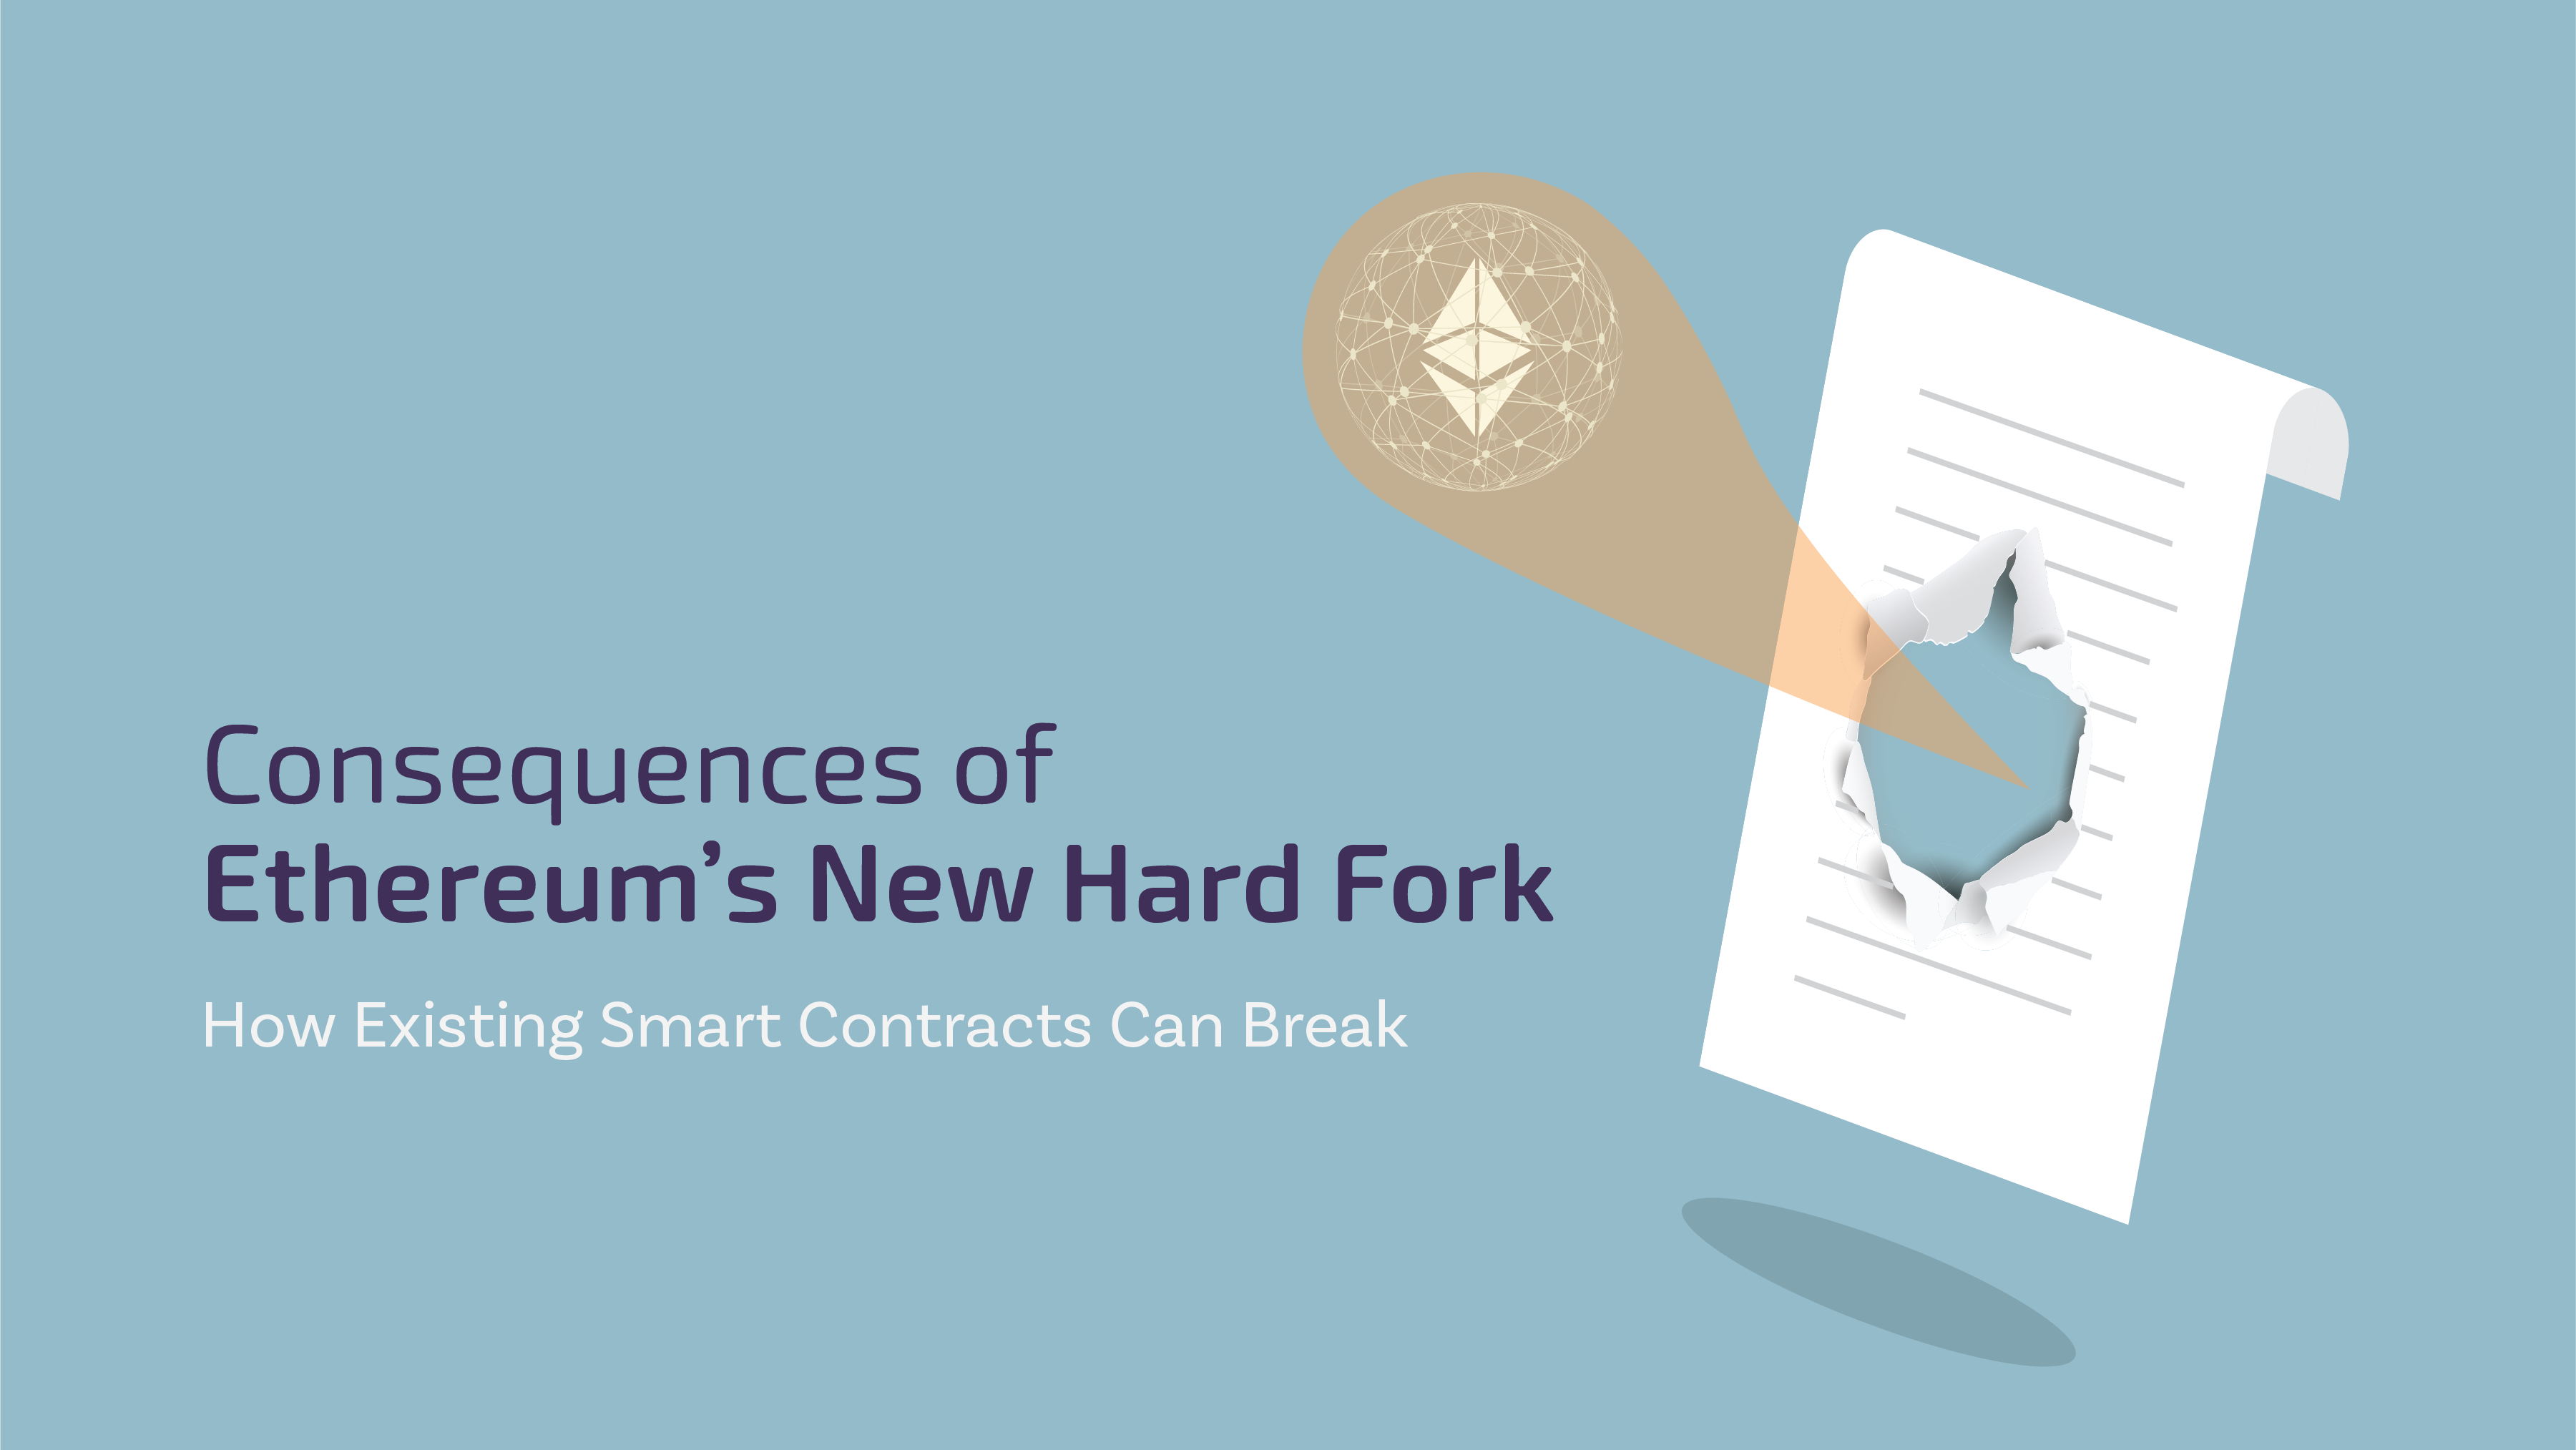 Upgrades to the Ethereum Network Could Break Existing Smart Contracts